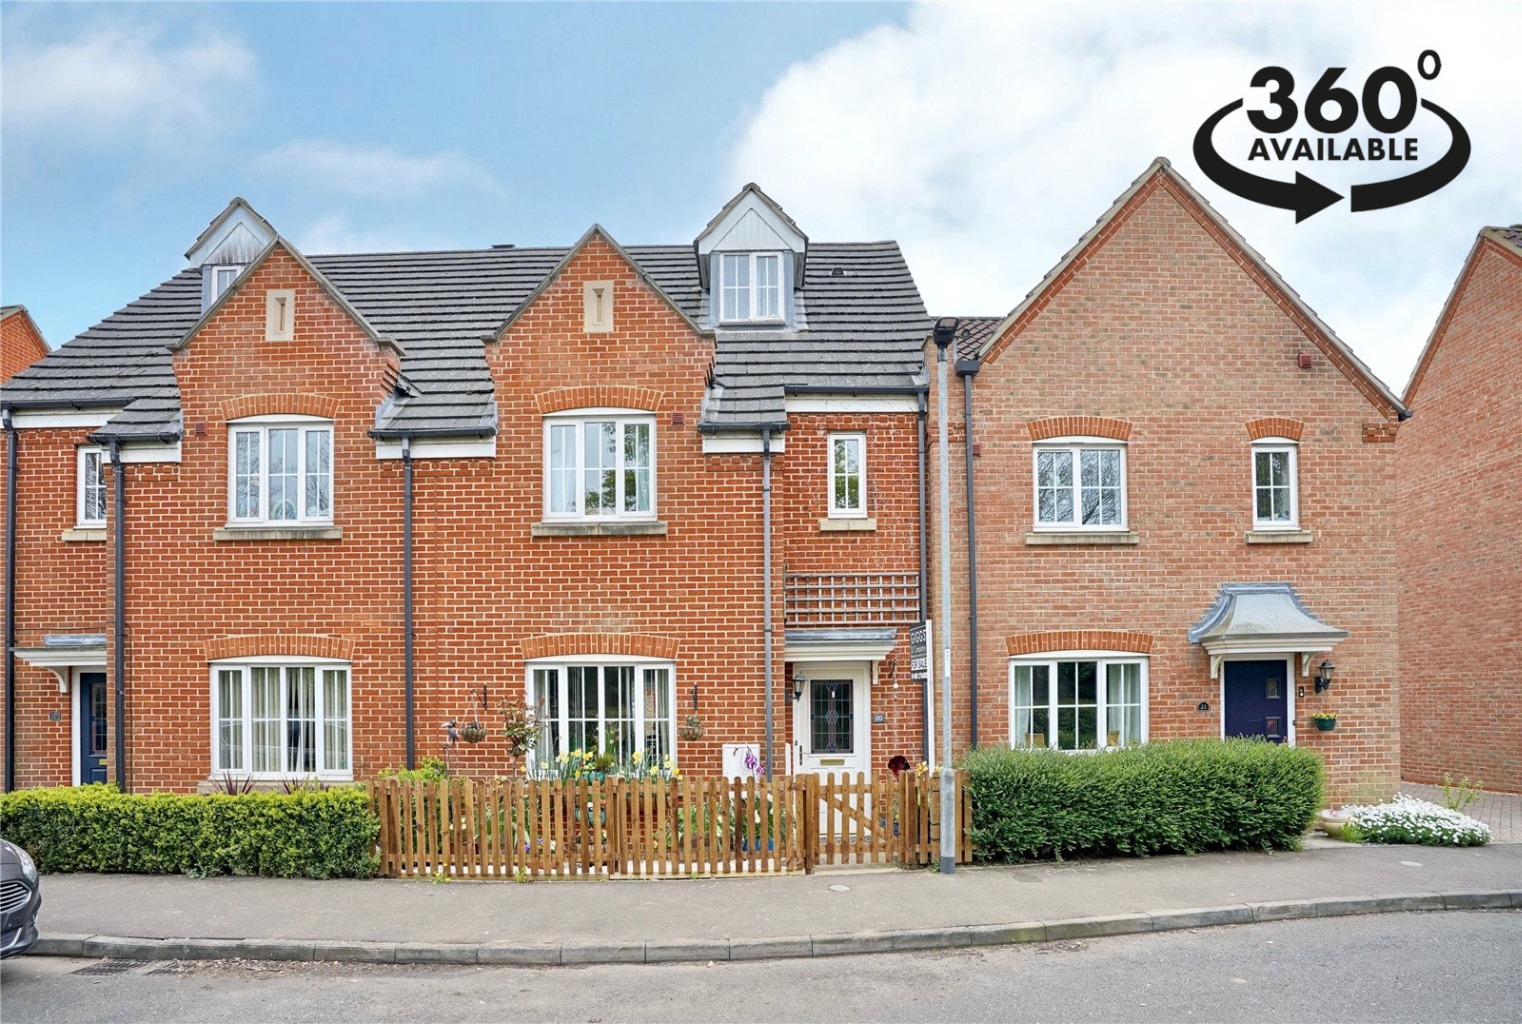 4 bed town house for sale in Beaufort Drive, St. Neots - Property Image 1